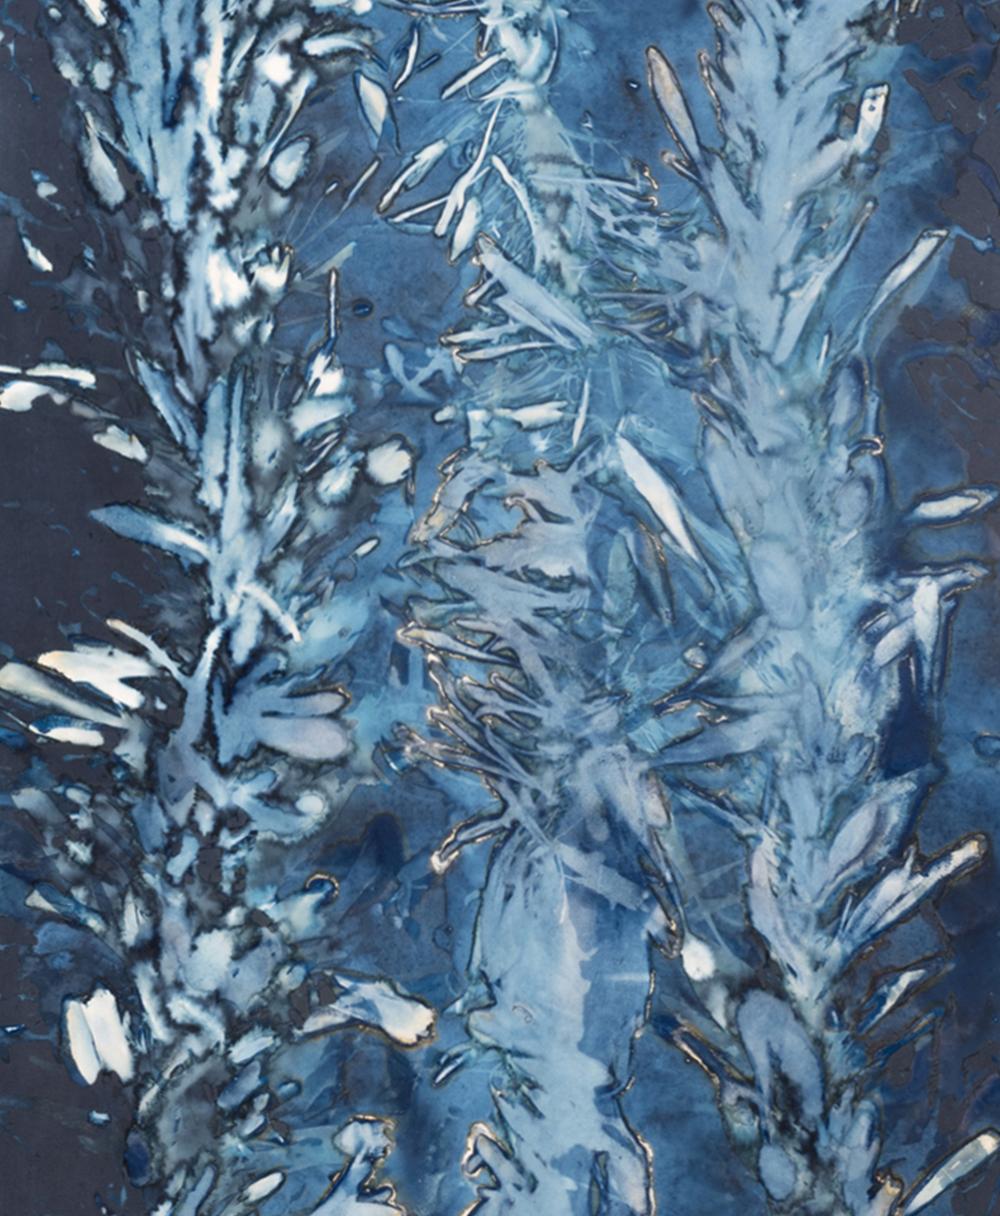 Laminariales XVIII. From the series Bosque Cyanotype photograph - Abstract Photograph by Paola Davila